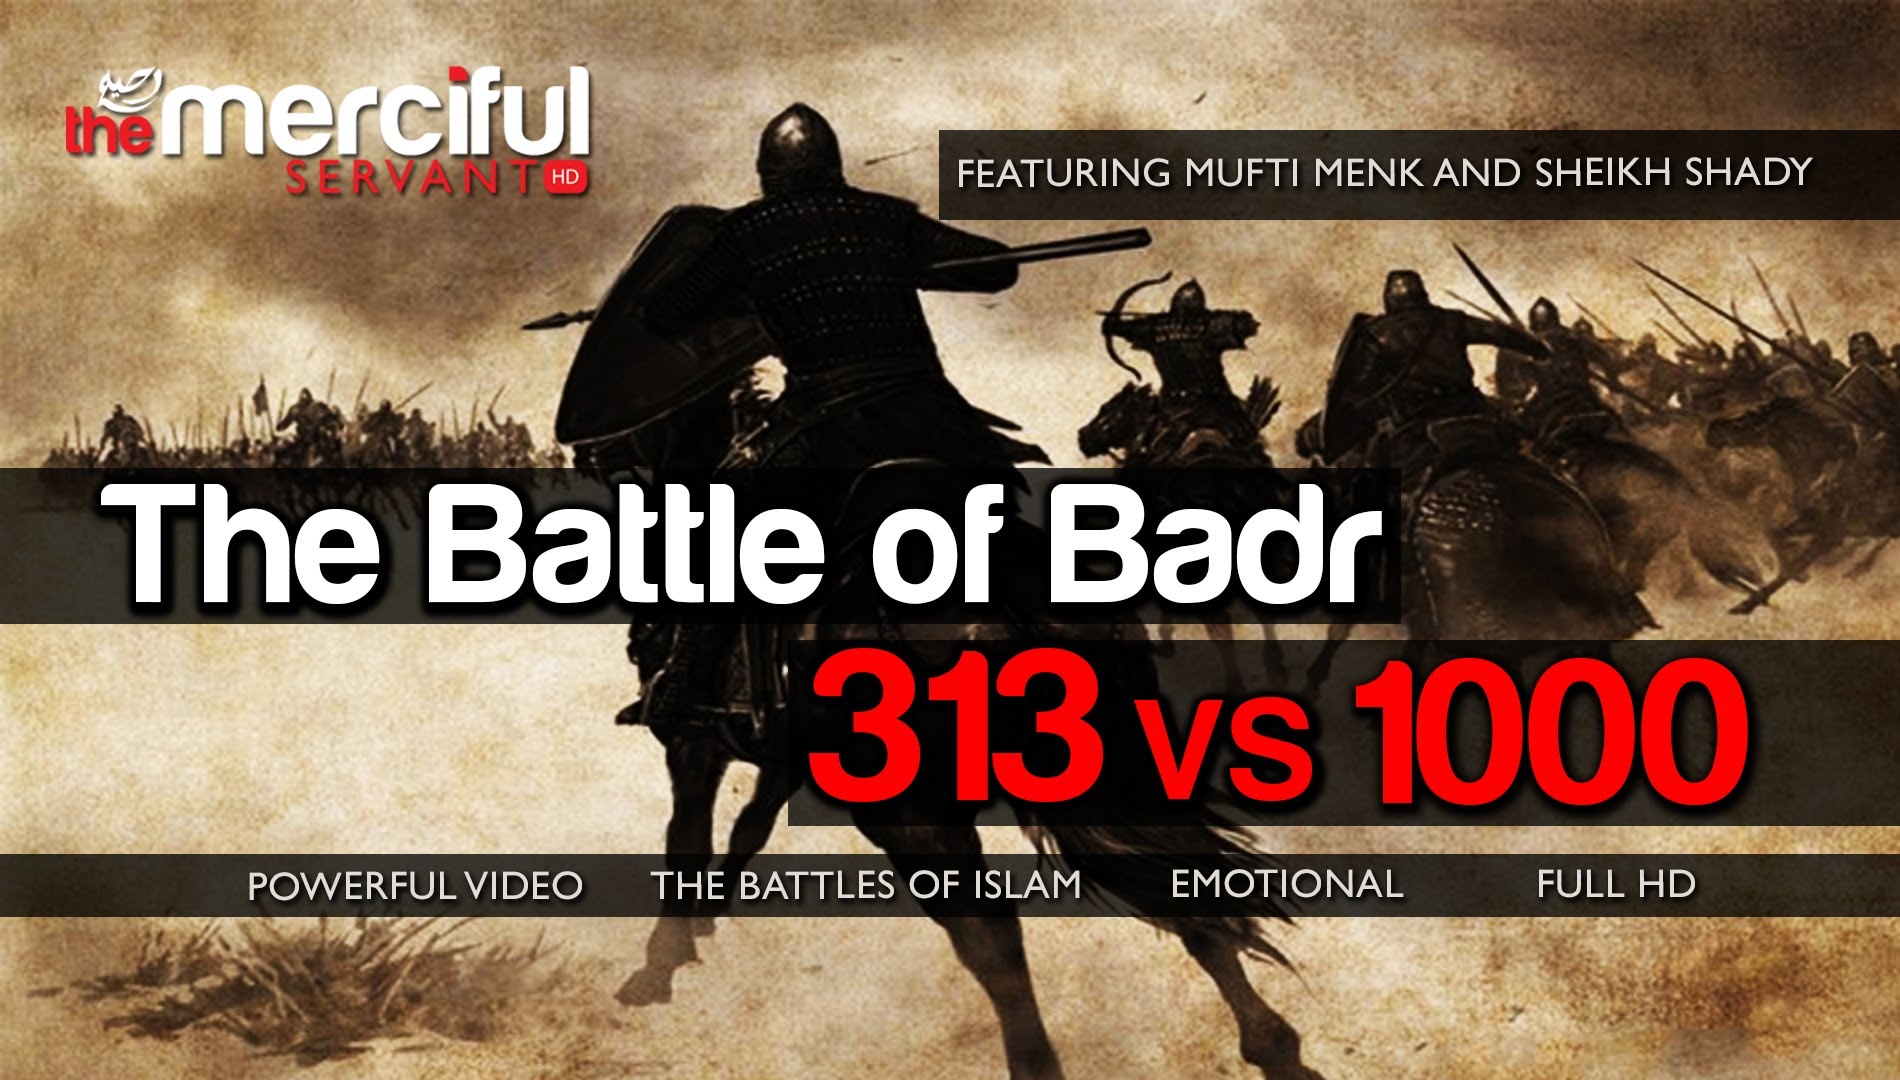 The Battle of Badr :: 313 vs 1000 ᴴᴰ - [Epic Full Video] :: Featuring Mufti Menk & Sheikh Shady